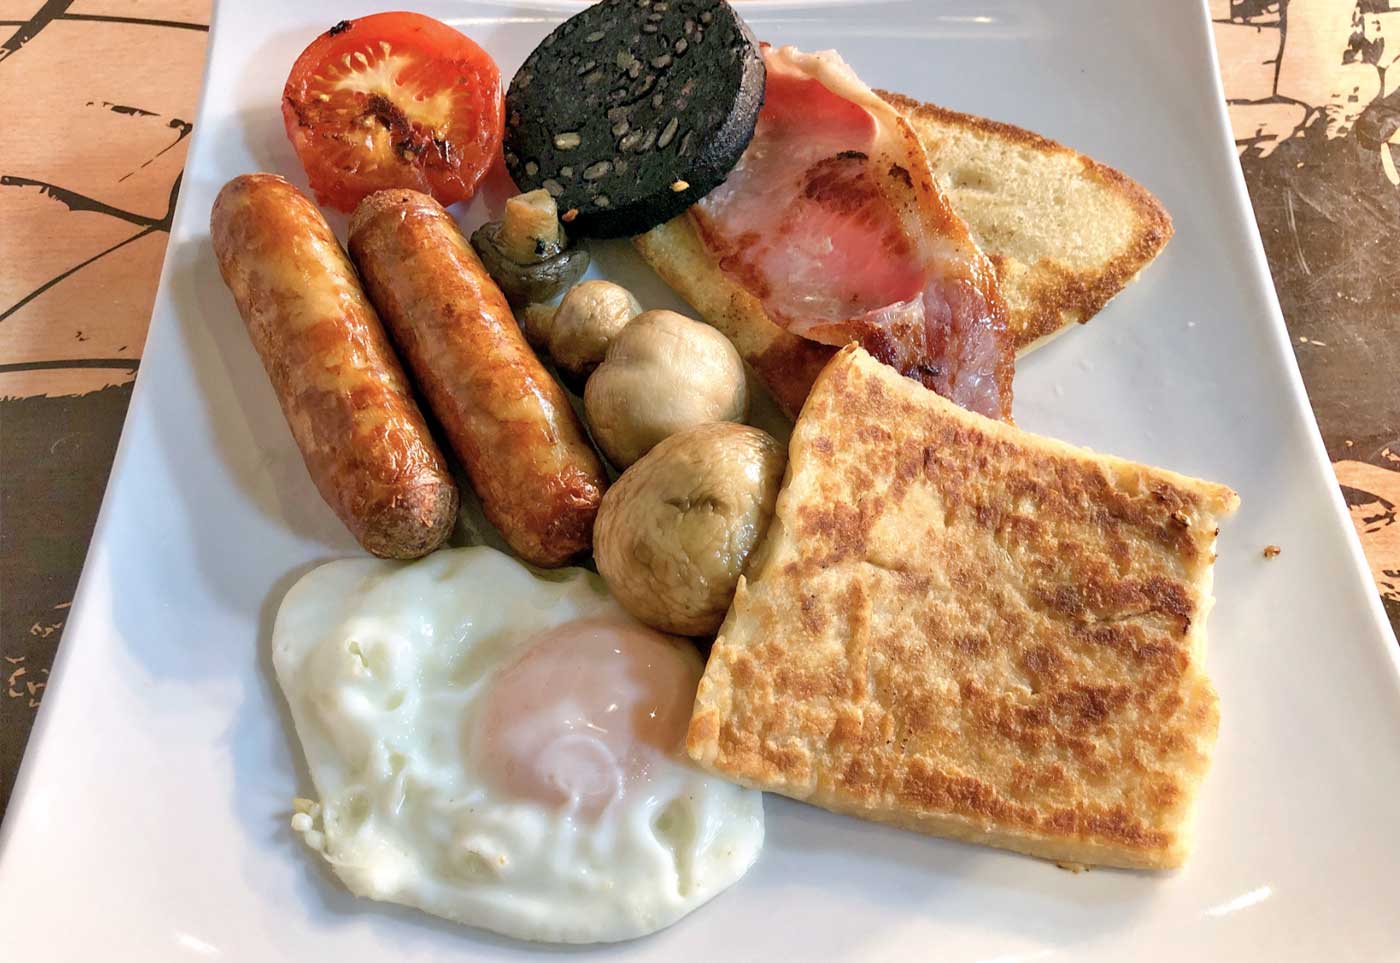 Ulster fry